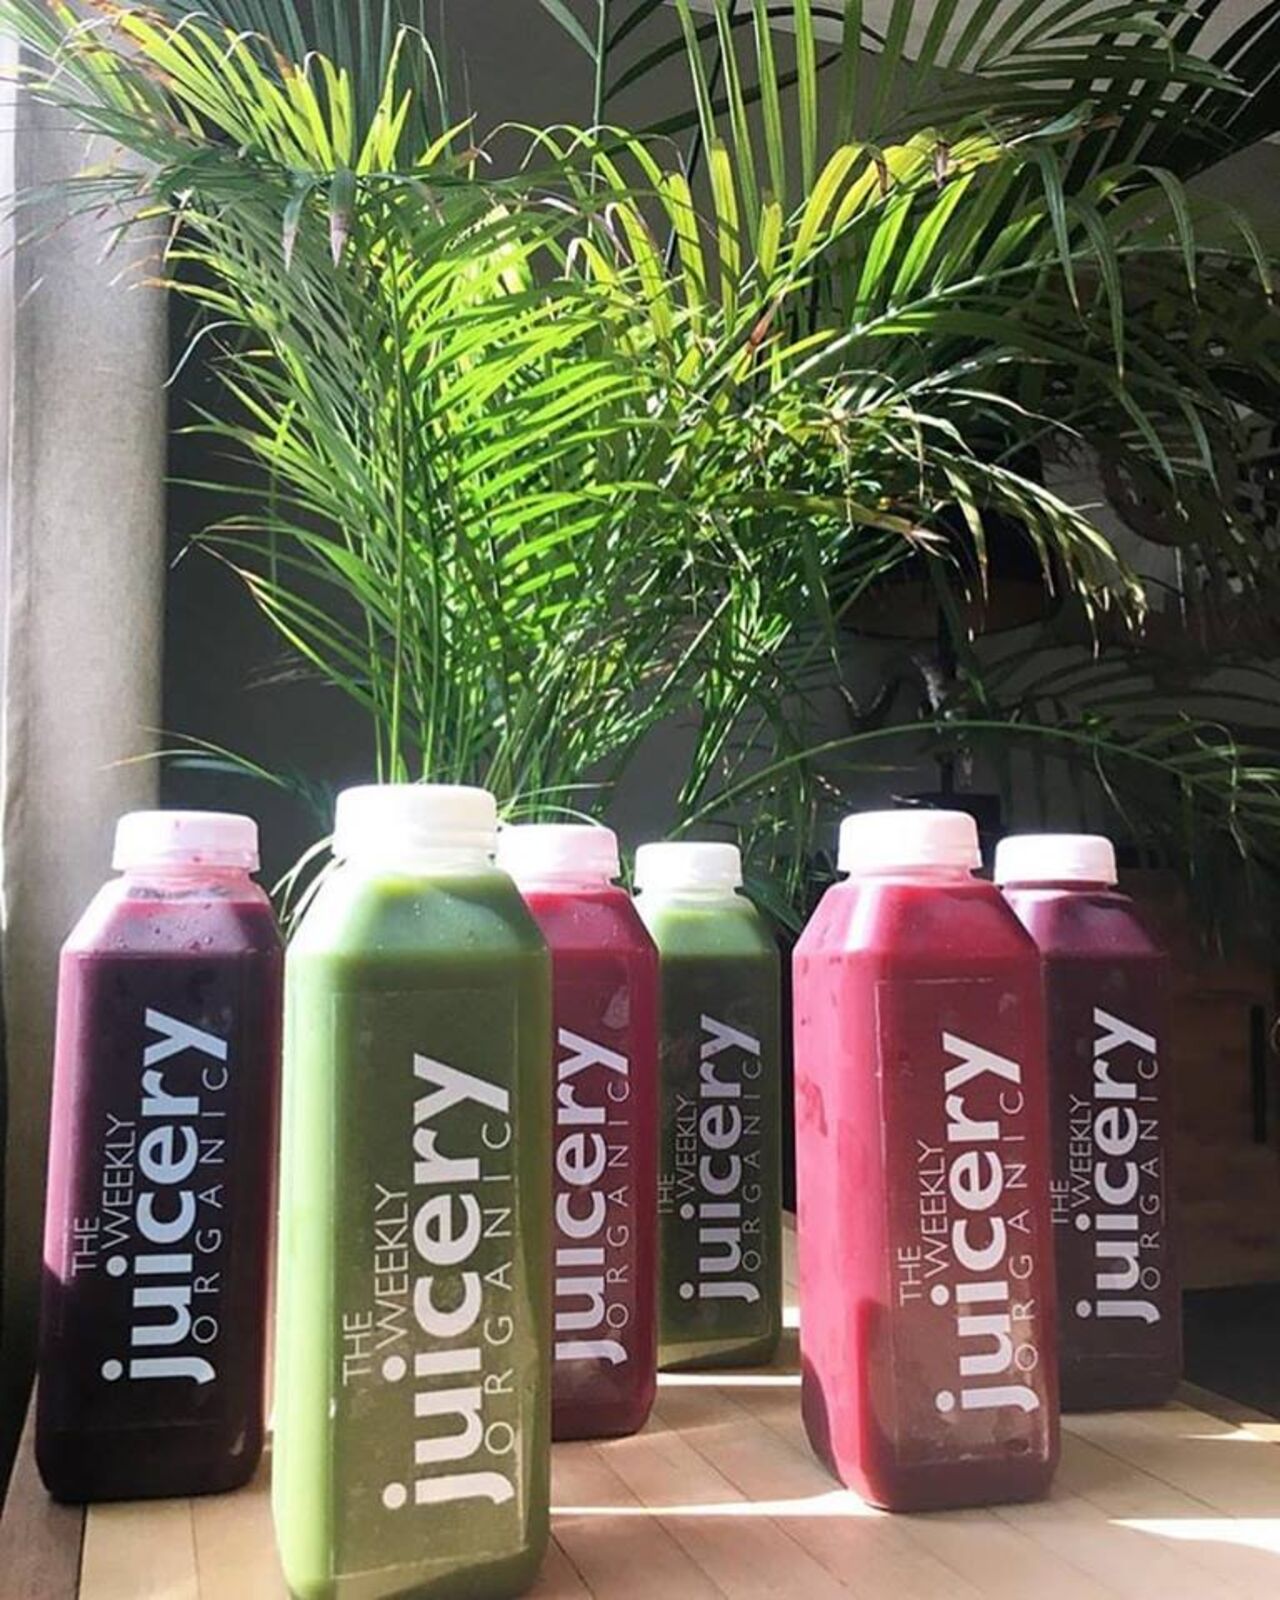 A photo of The Weekly Juicery